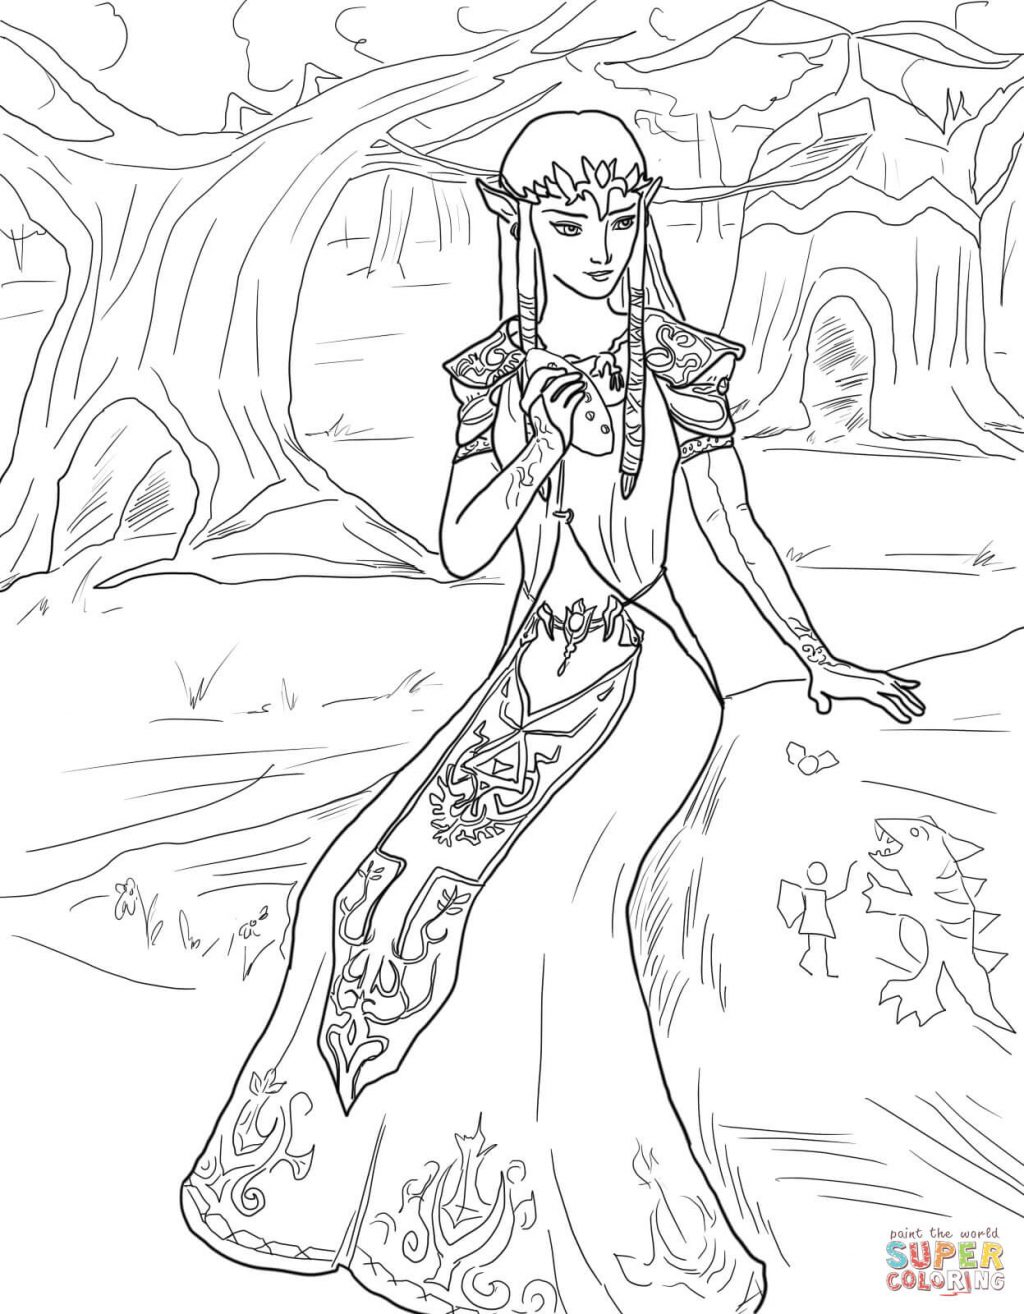 Legend Of Zelda Coloring Pages Online Project Ideas Zelda Coloring Page Princess Free Printable Pages